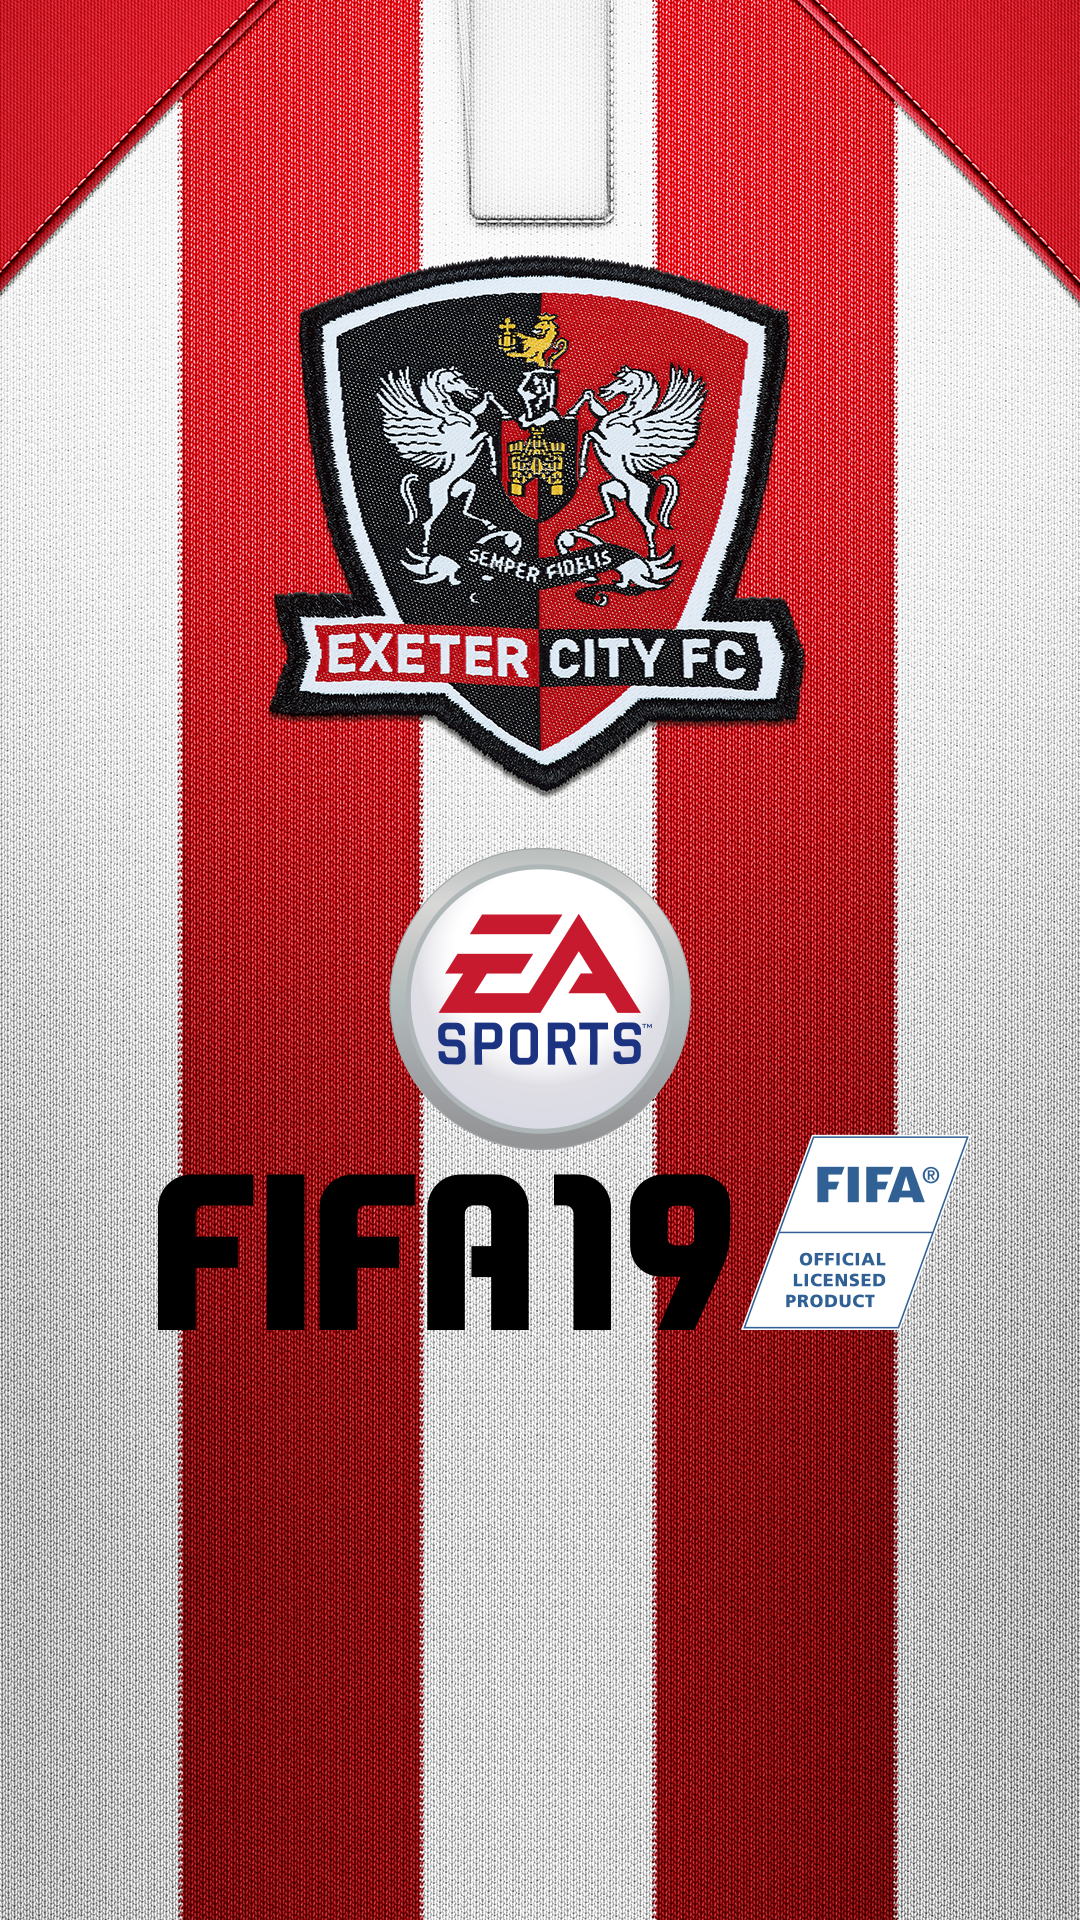 FIFA 19 - Exeter City Club Pack - EA SPORTS